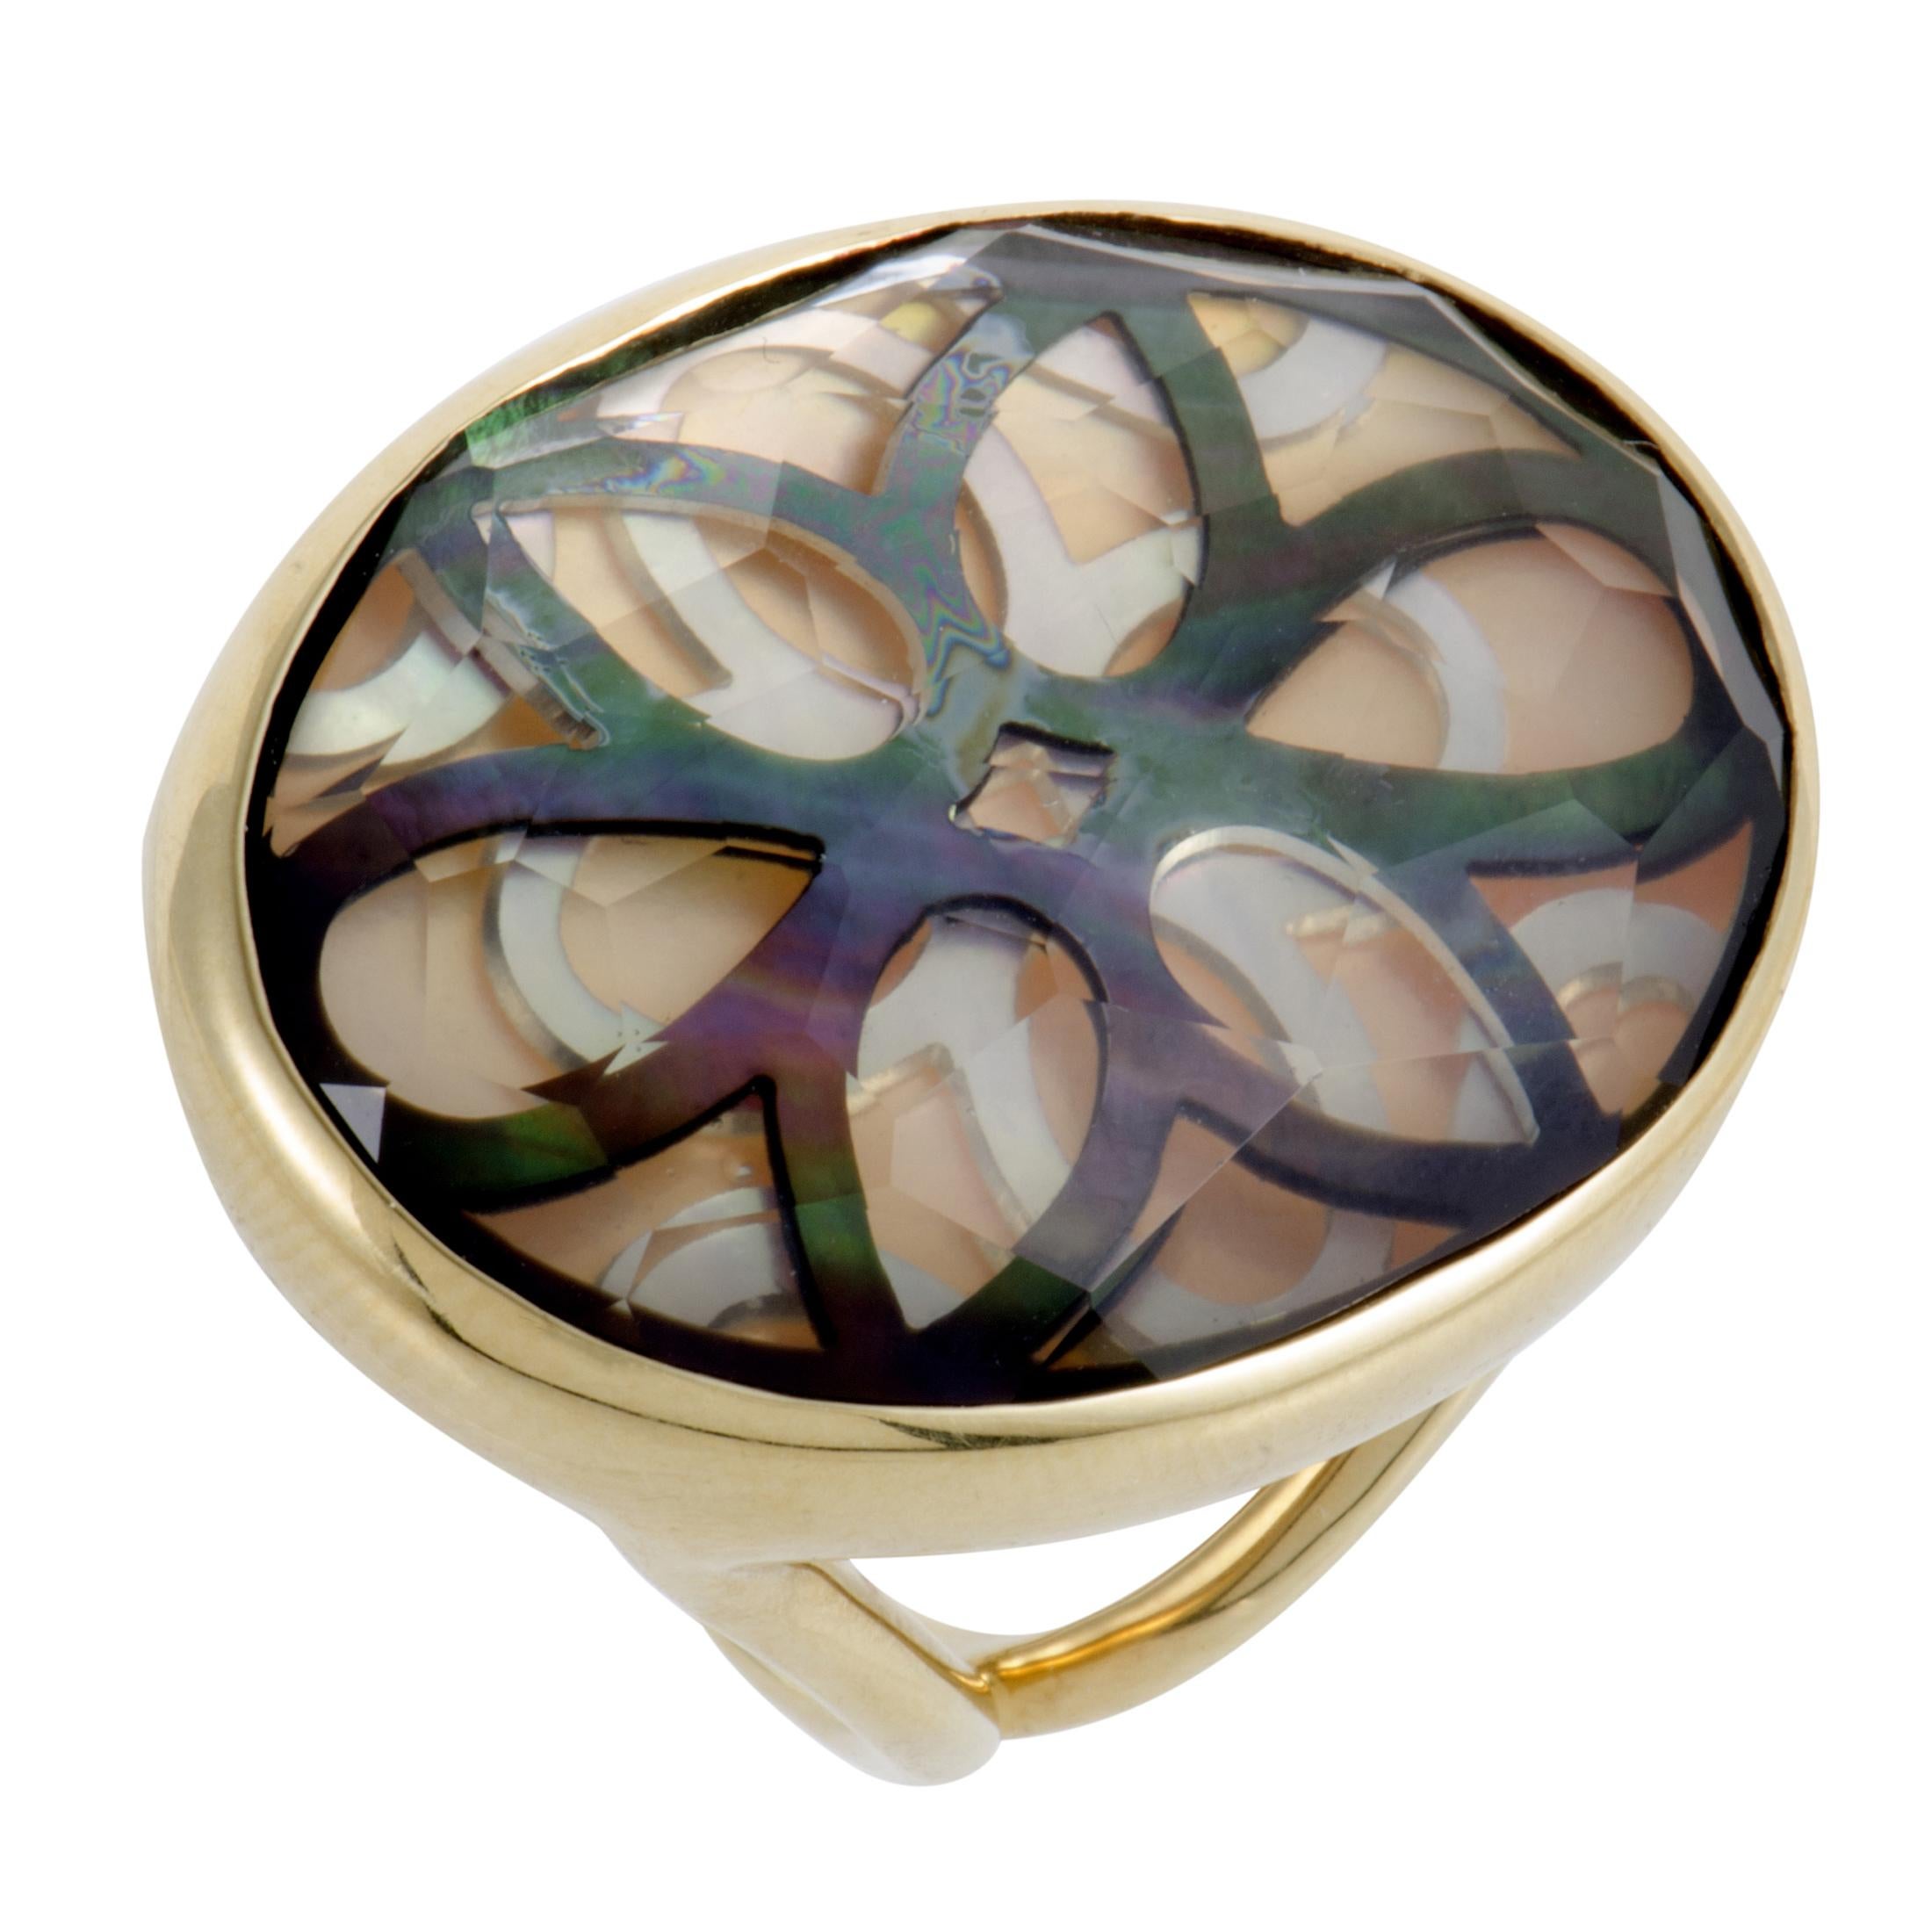 Polished Rock Candy 18 Karat Yellow Gold Quartz and Mother of Pearl Cutout Ring